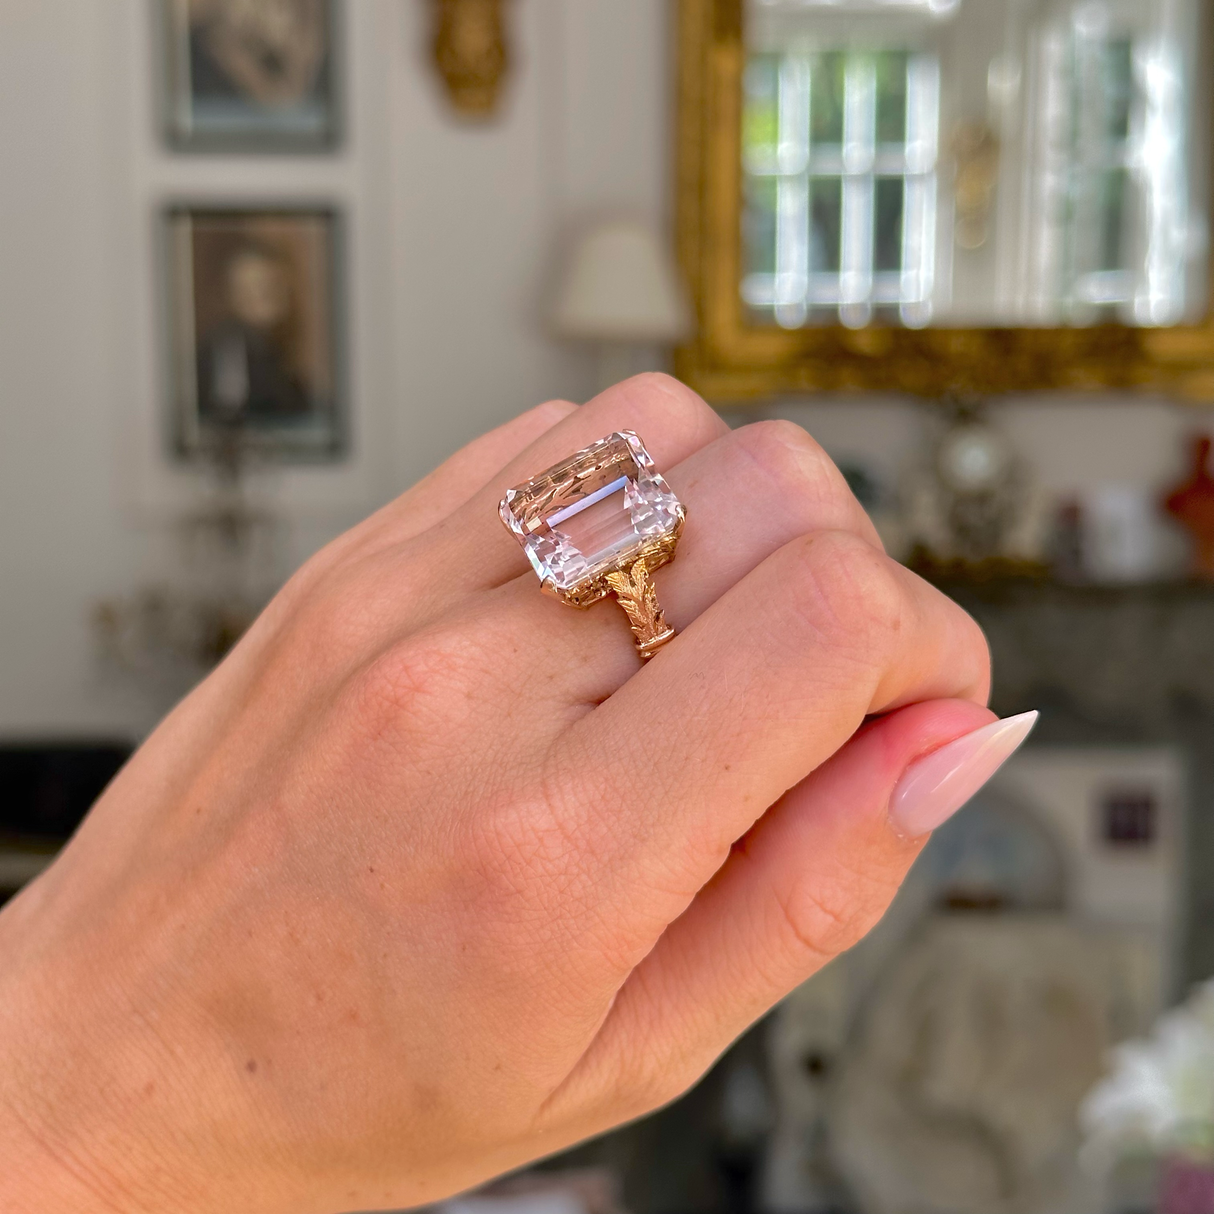 Morganite cocktail ring worn on closed hand. 